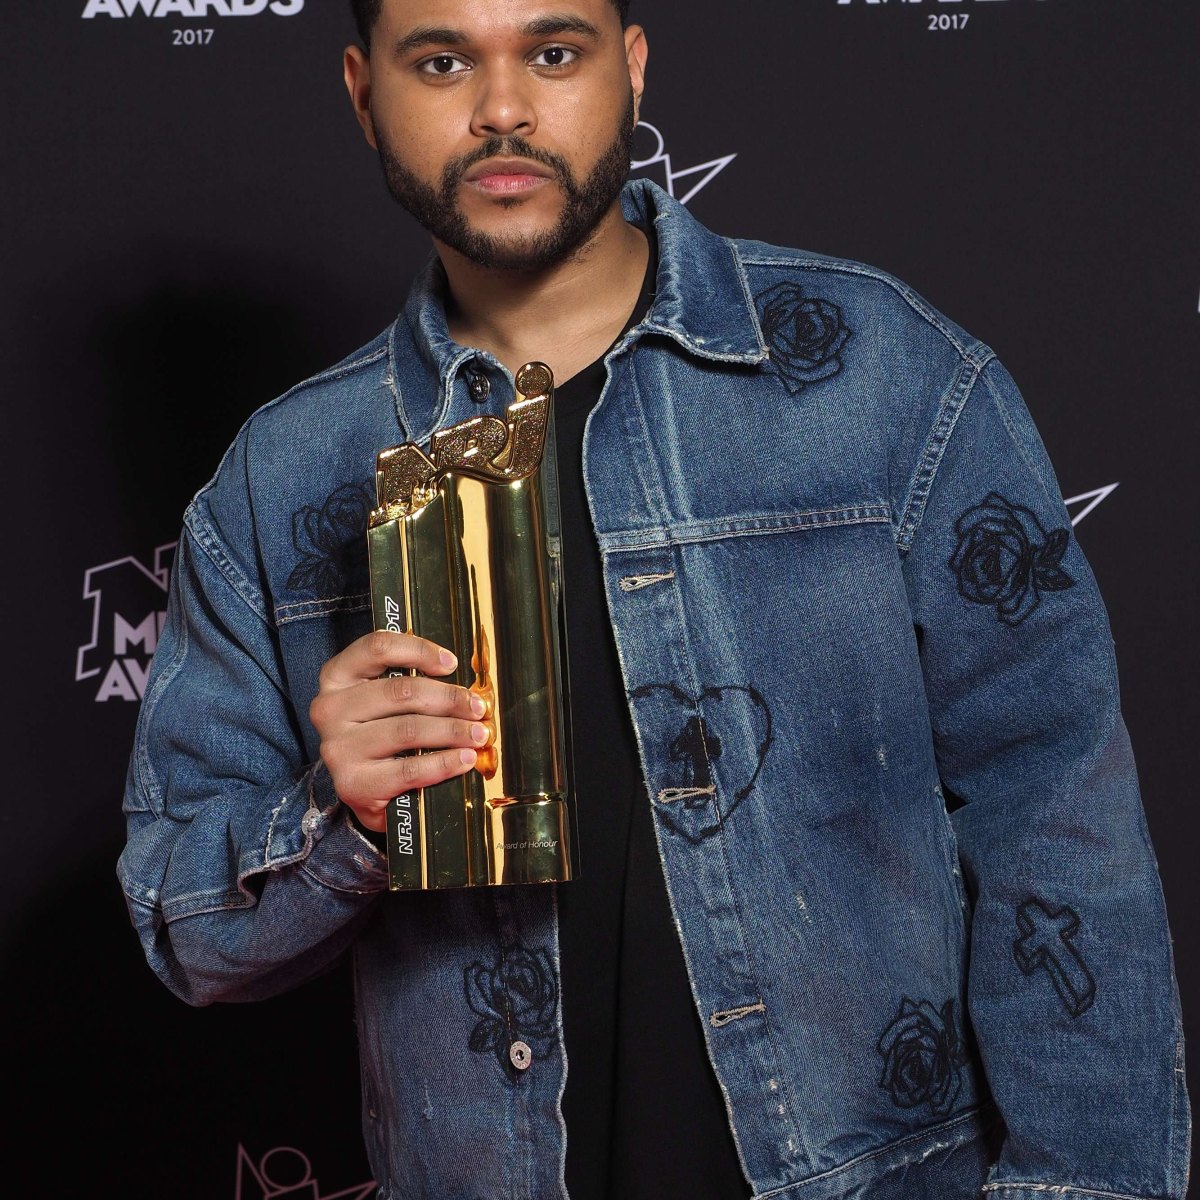 Did The Weeknd Get Plastic Surgery? Transformation Photos